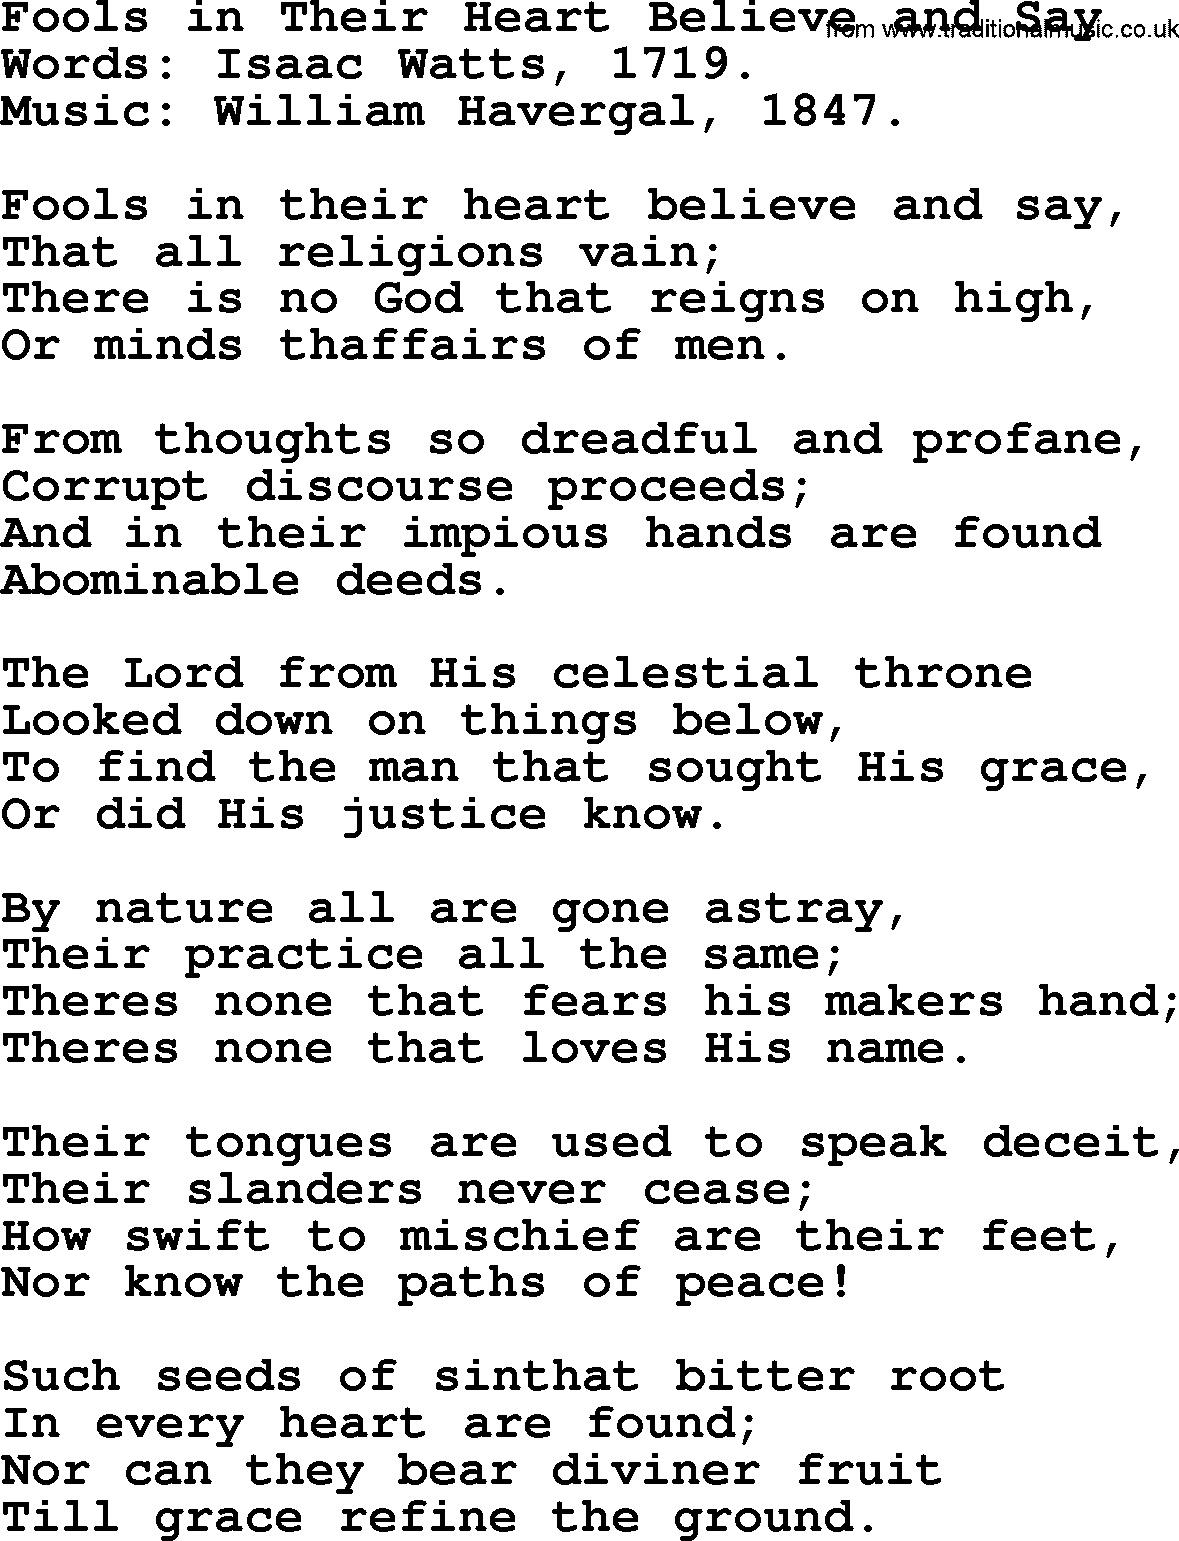 Isaac Watts Christian hymn: Fools in Their Heart Believe and Say- lyricss